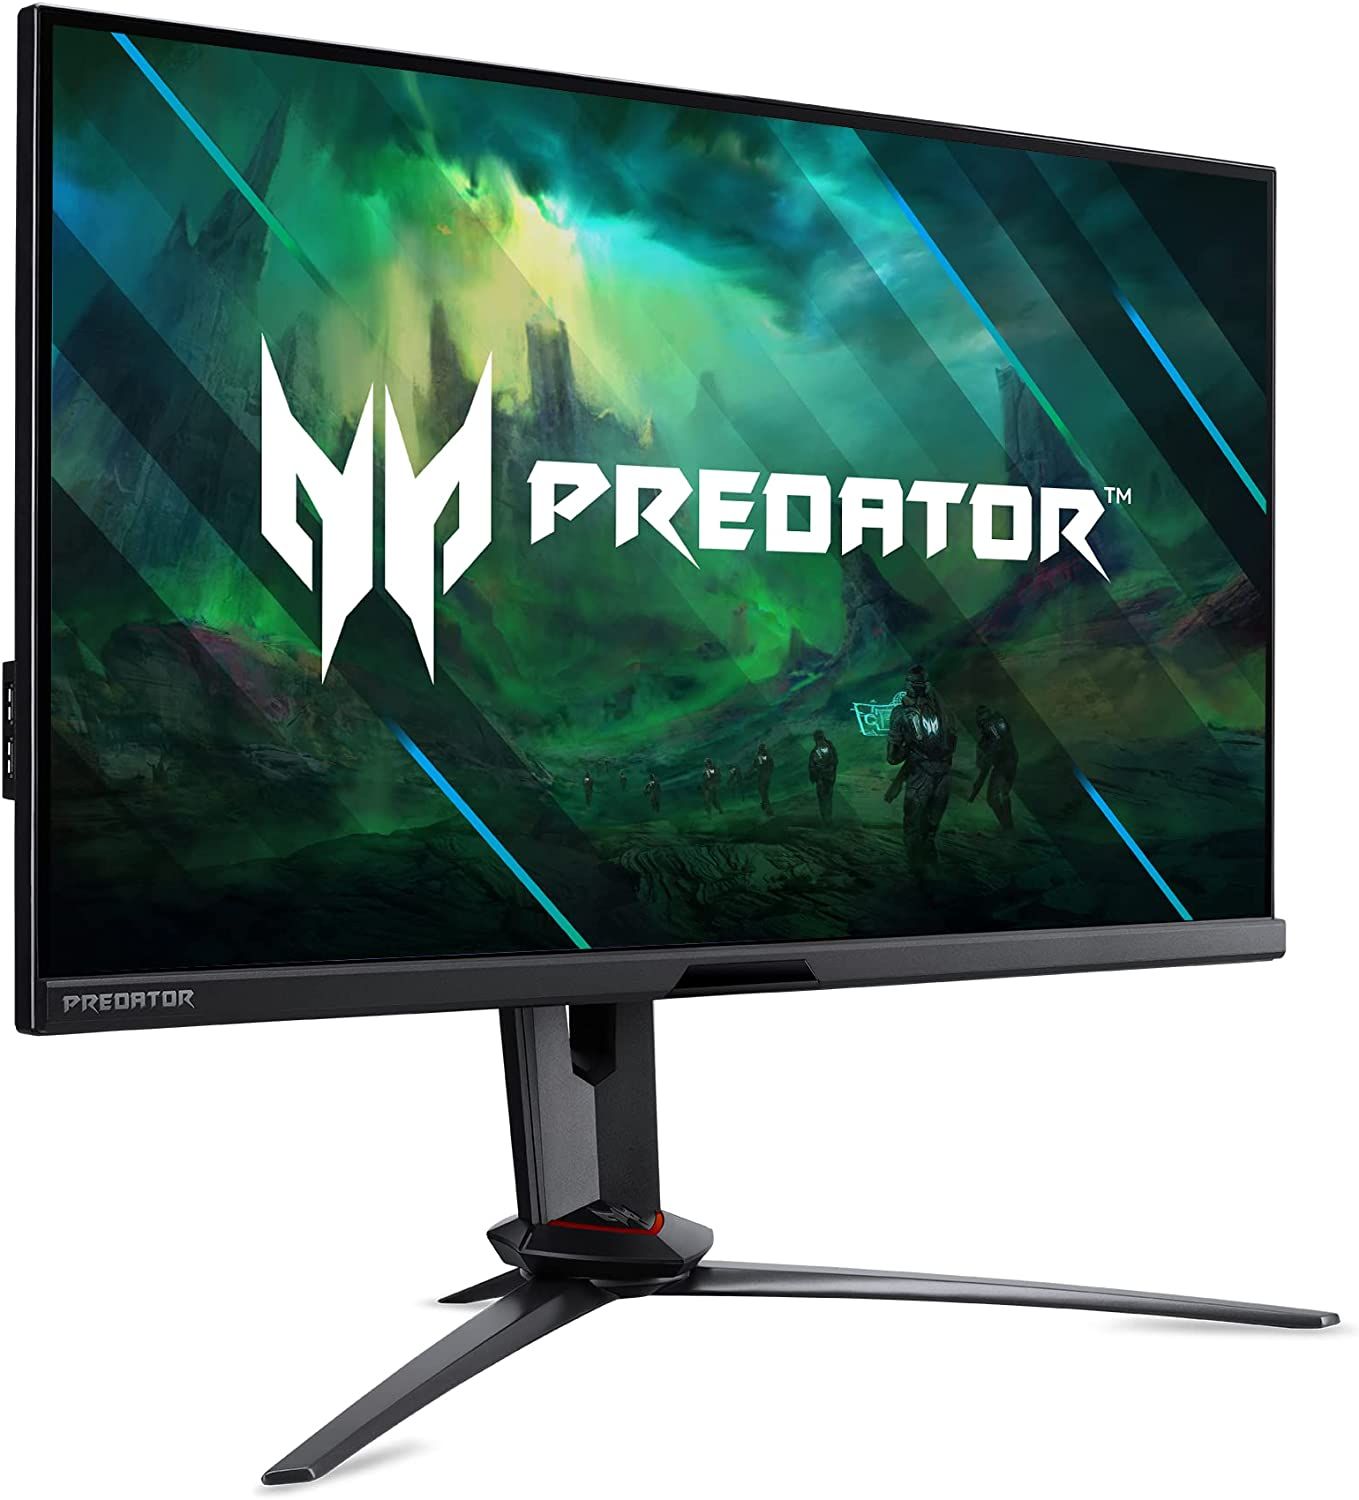 Black-framed flat Acer monitor with green visuals on display.